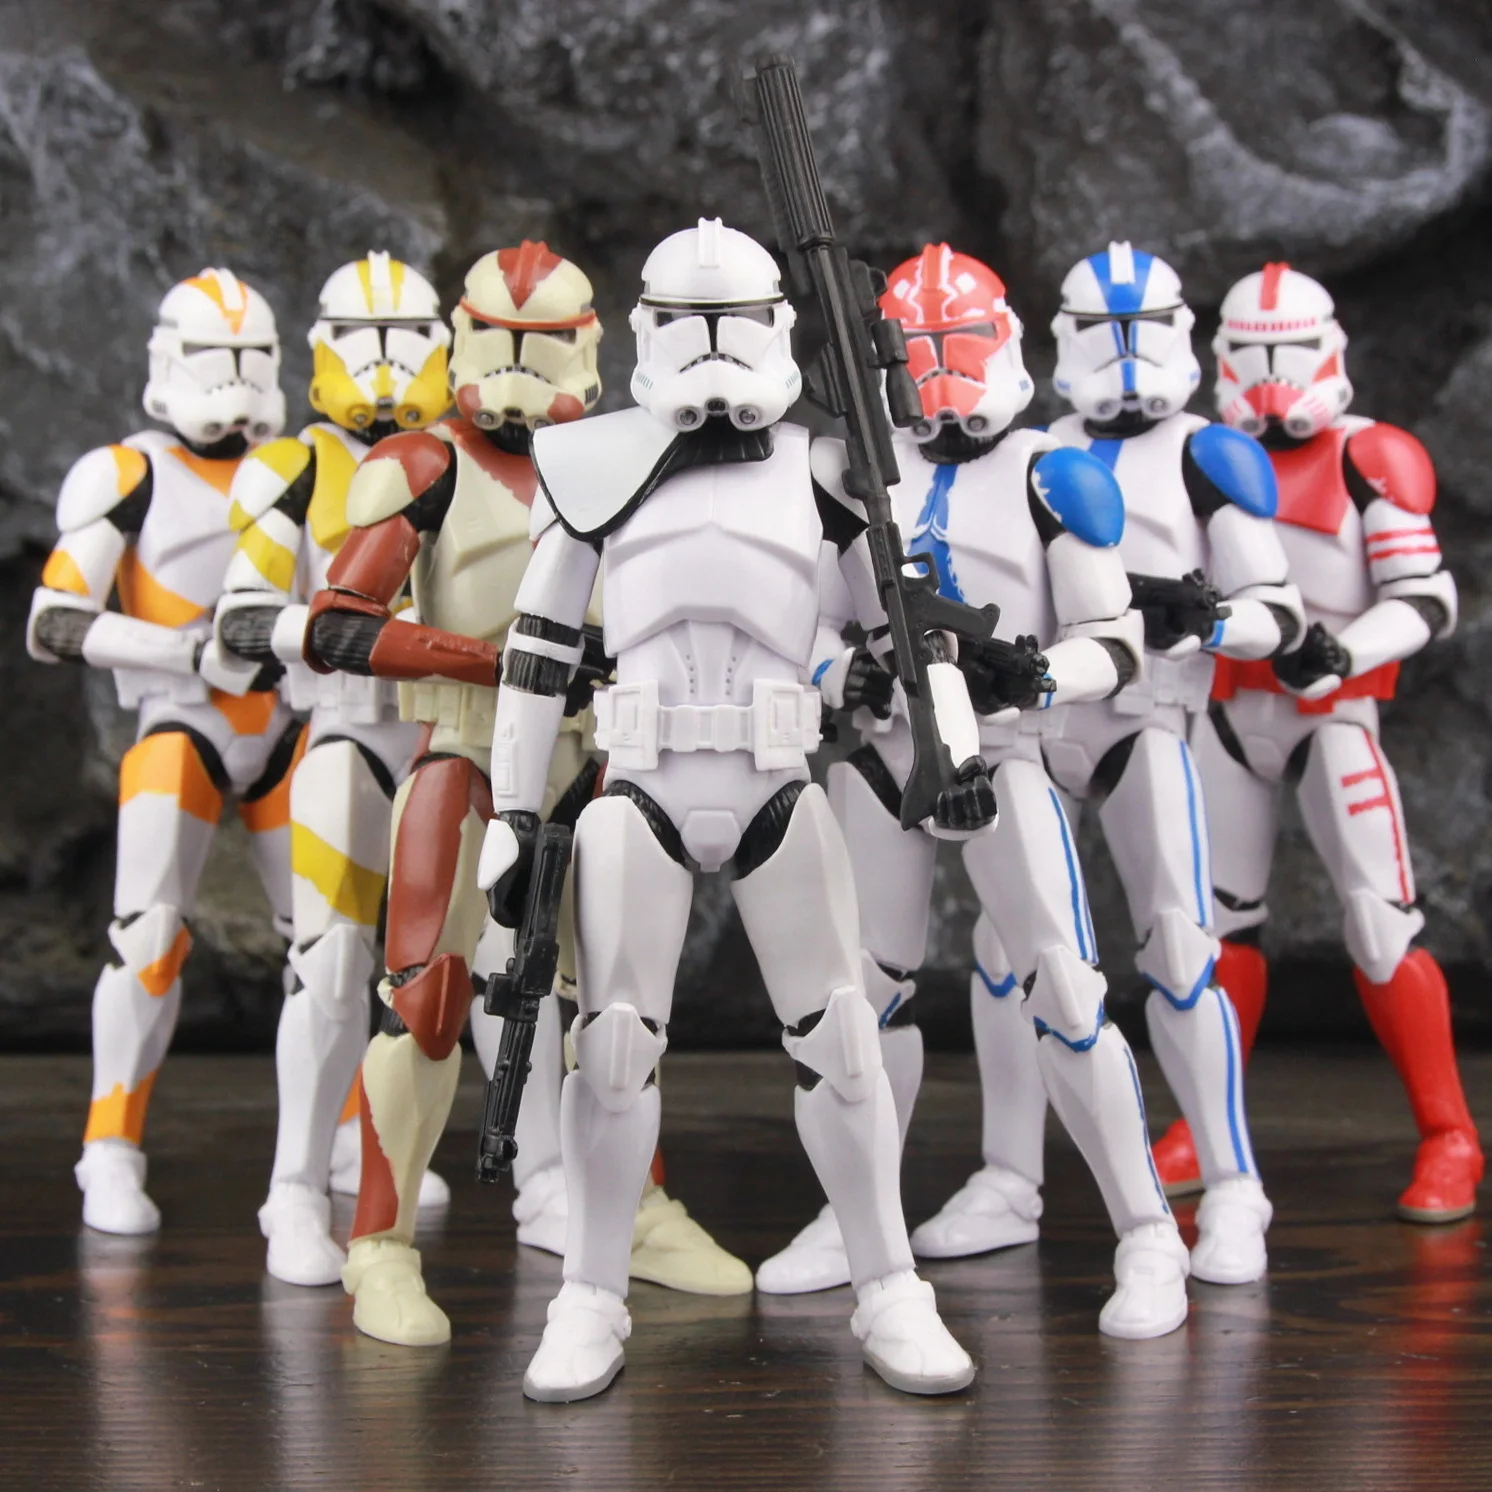 Star Wars 104th 212th 442nd 332nd 501st 6'' Action Figure ARC ARF Trooper Shock Asohka Commander Phase 2 Episode II Clone Toys